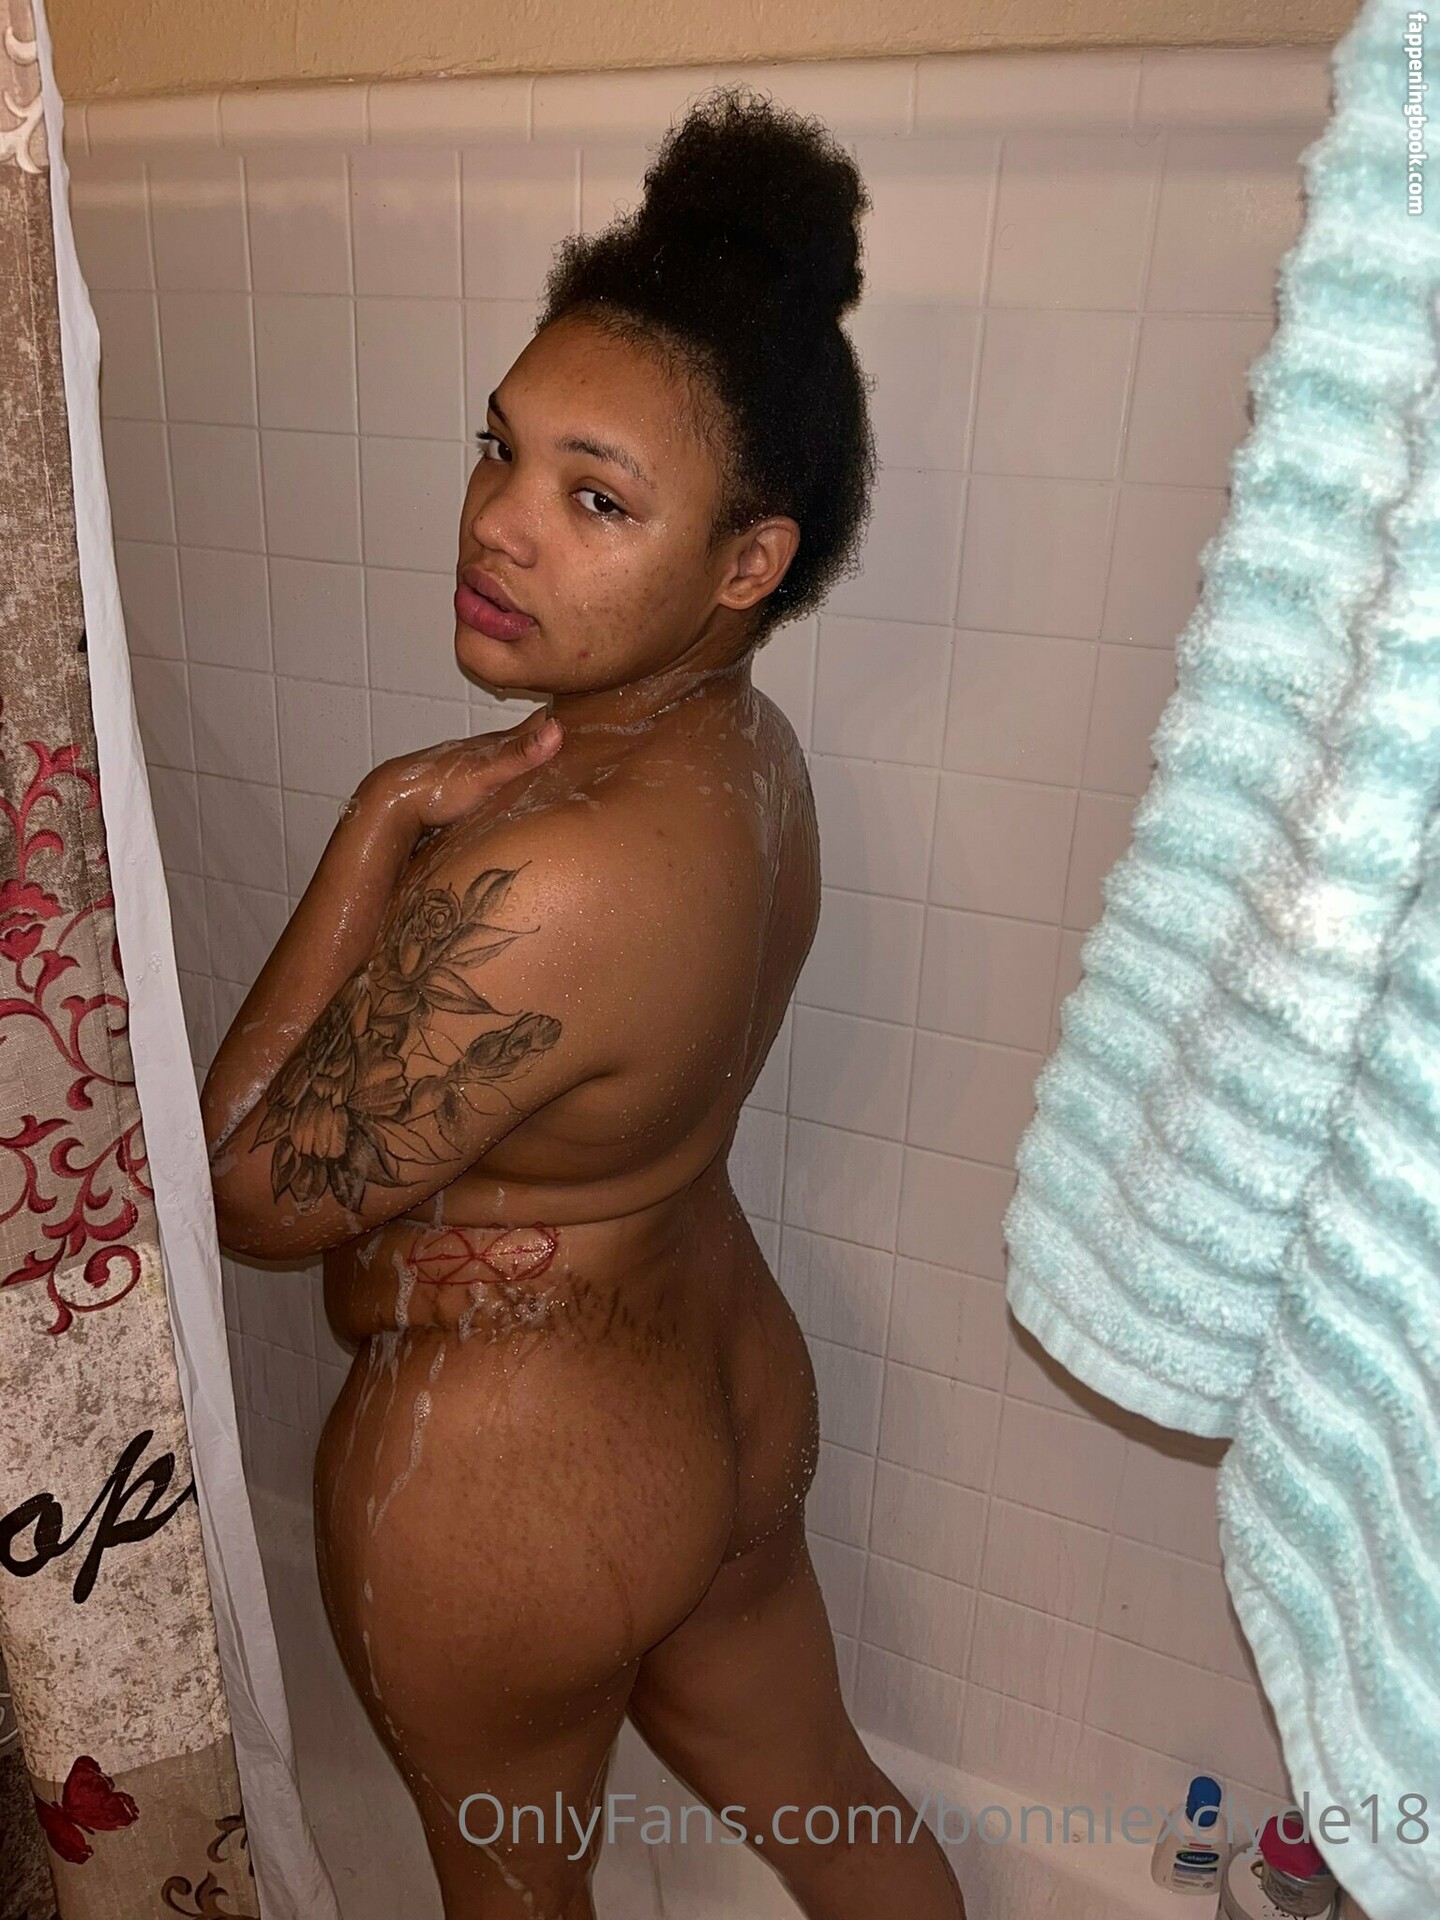 bonniexclyde18 Nude OnlyFans Leaks